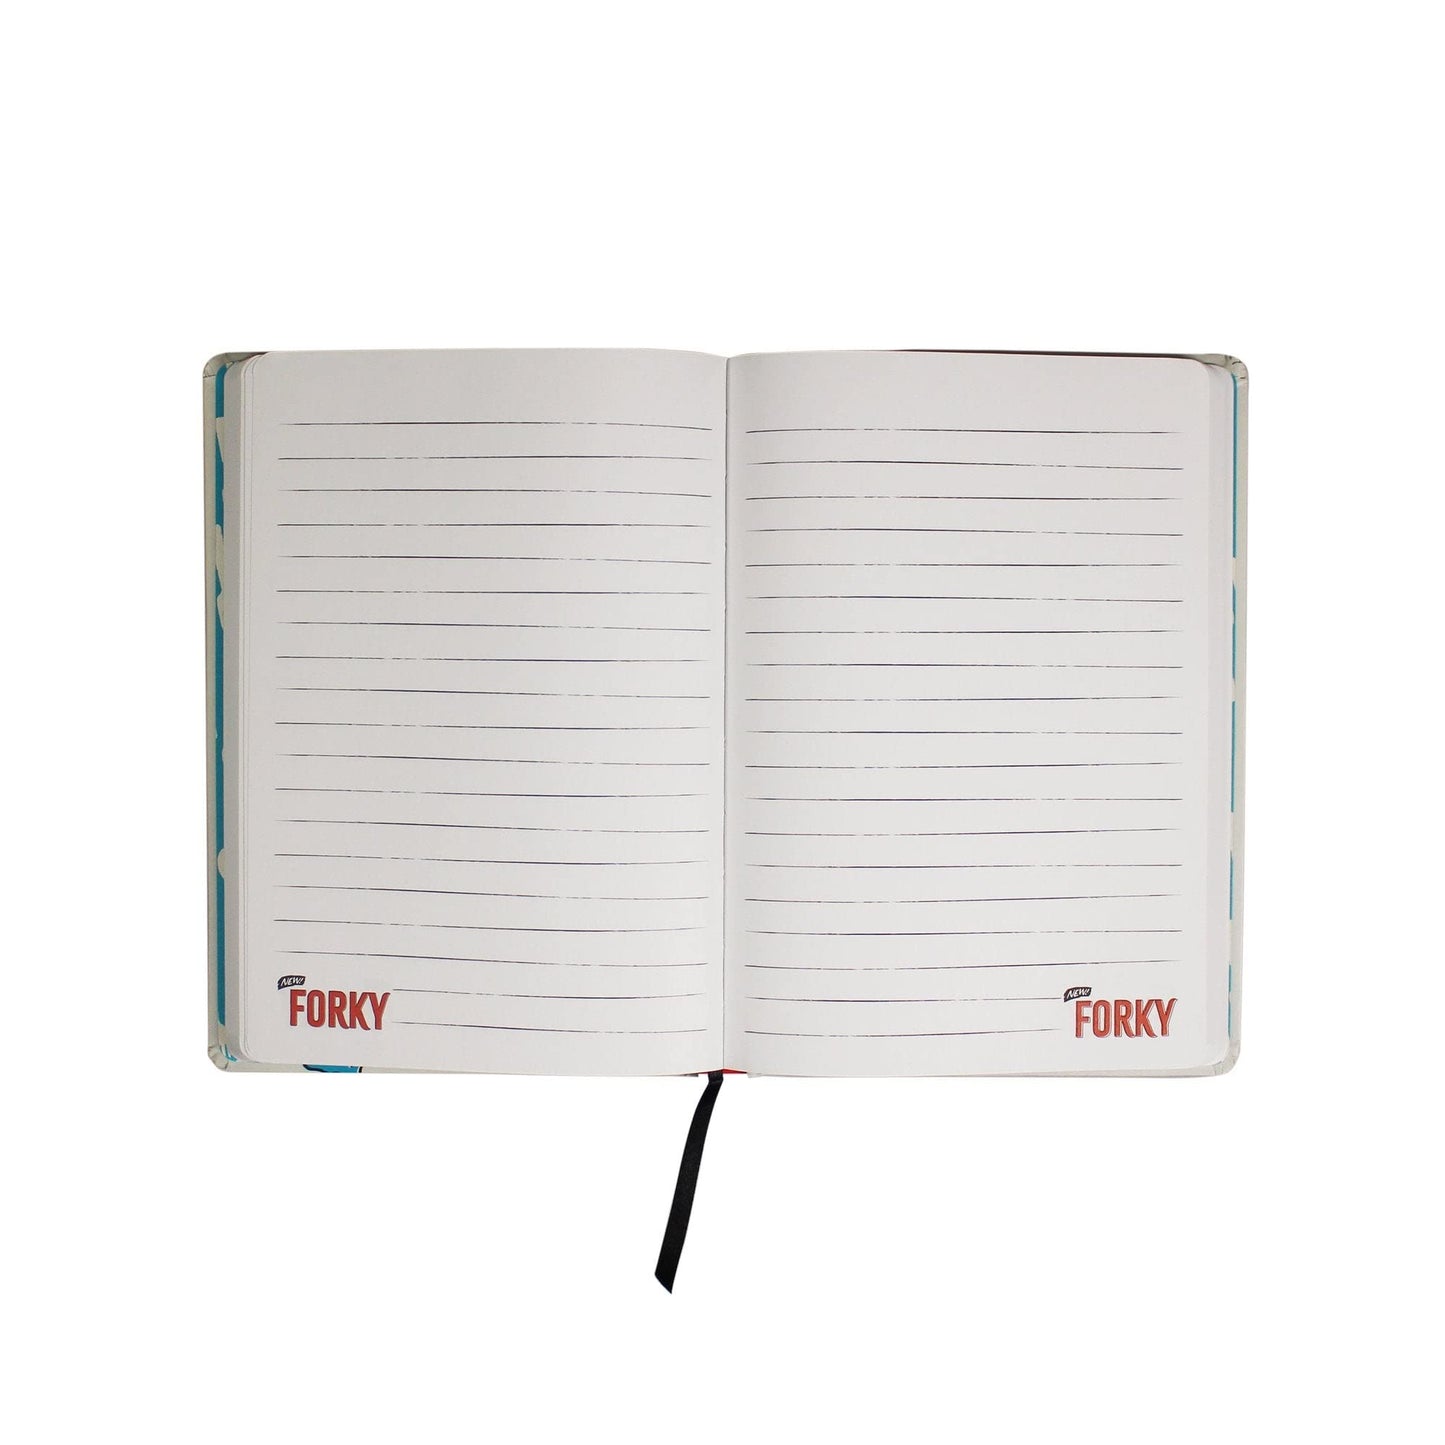 Toy Story 4 Forky Existential Crisis A5 Notebook